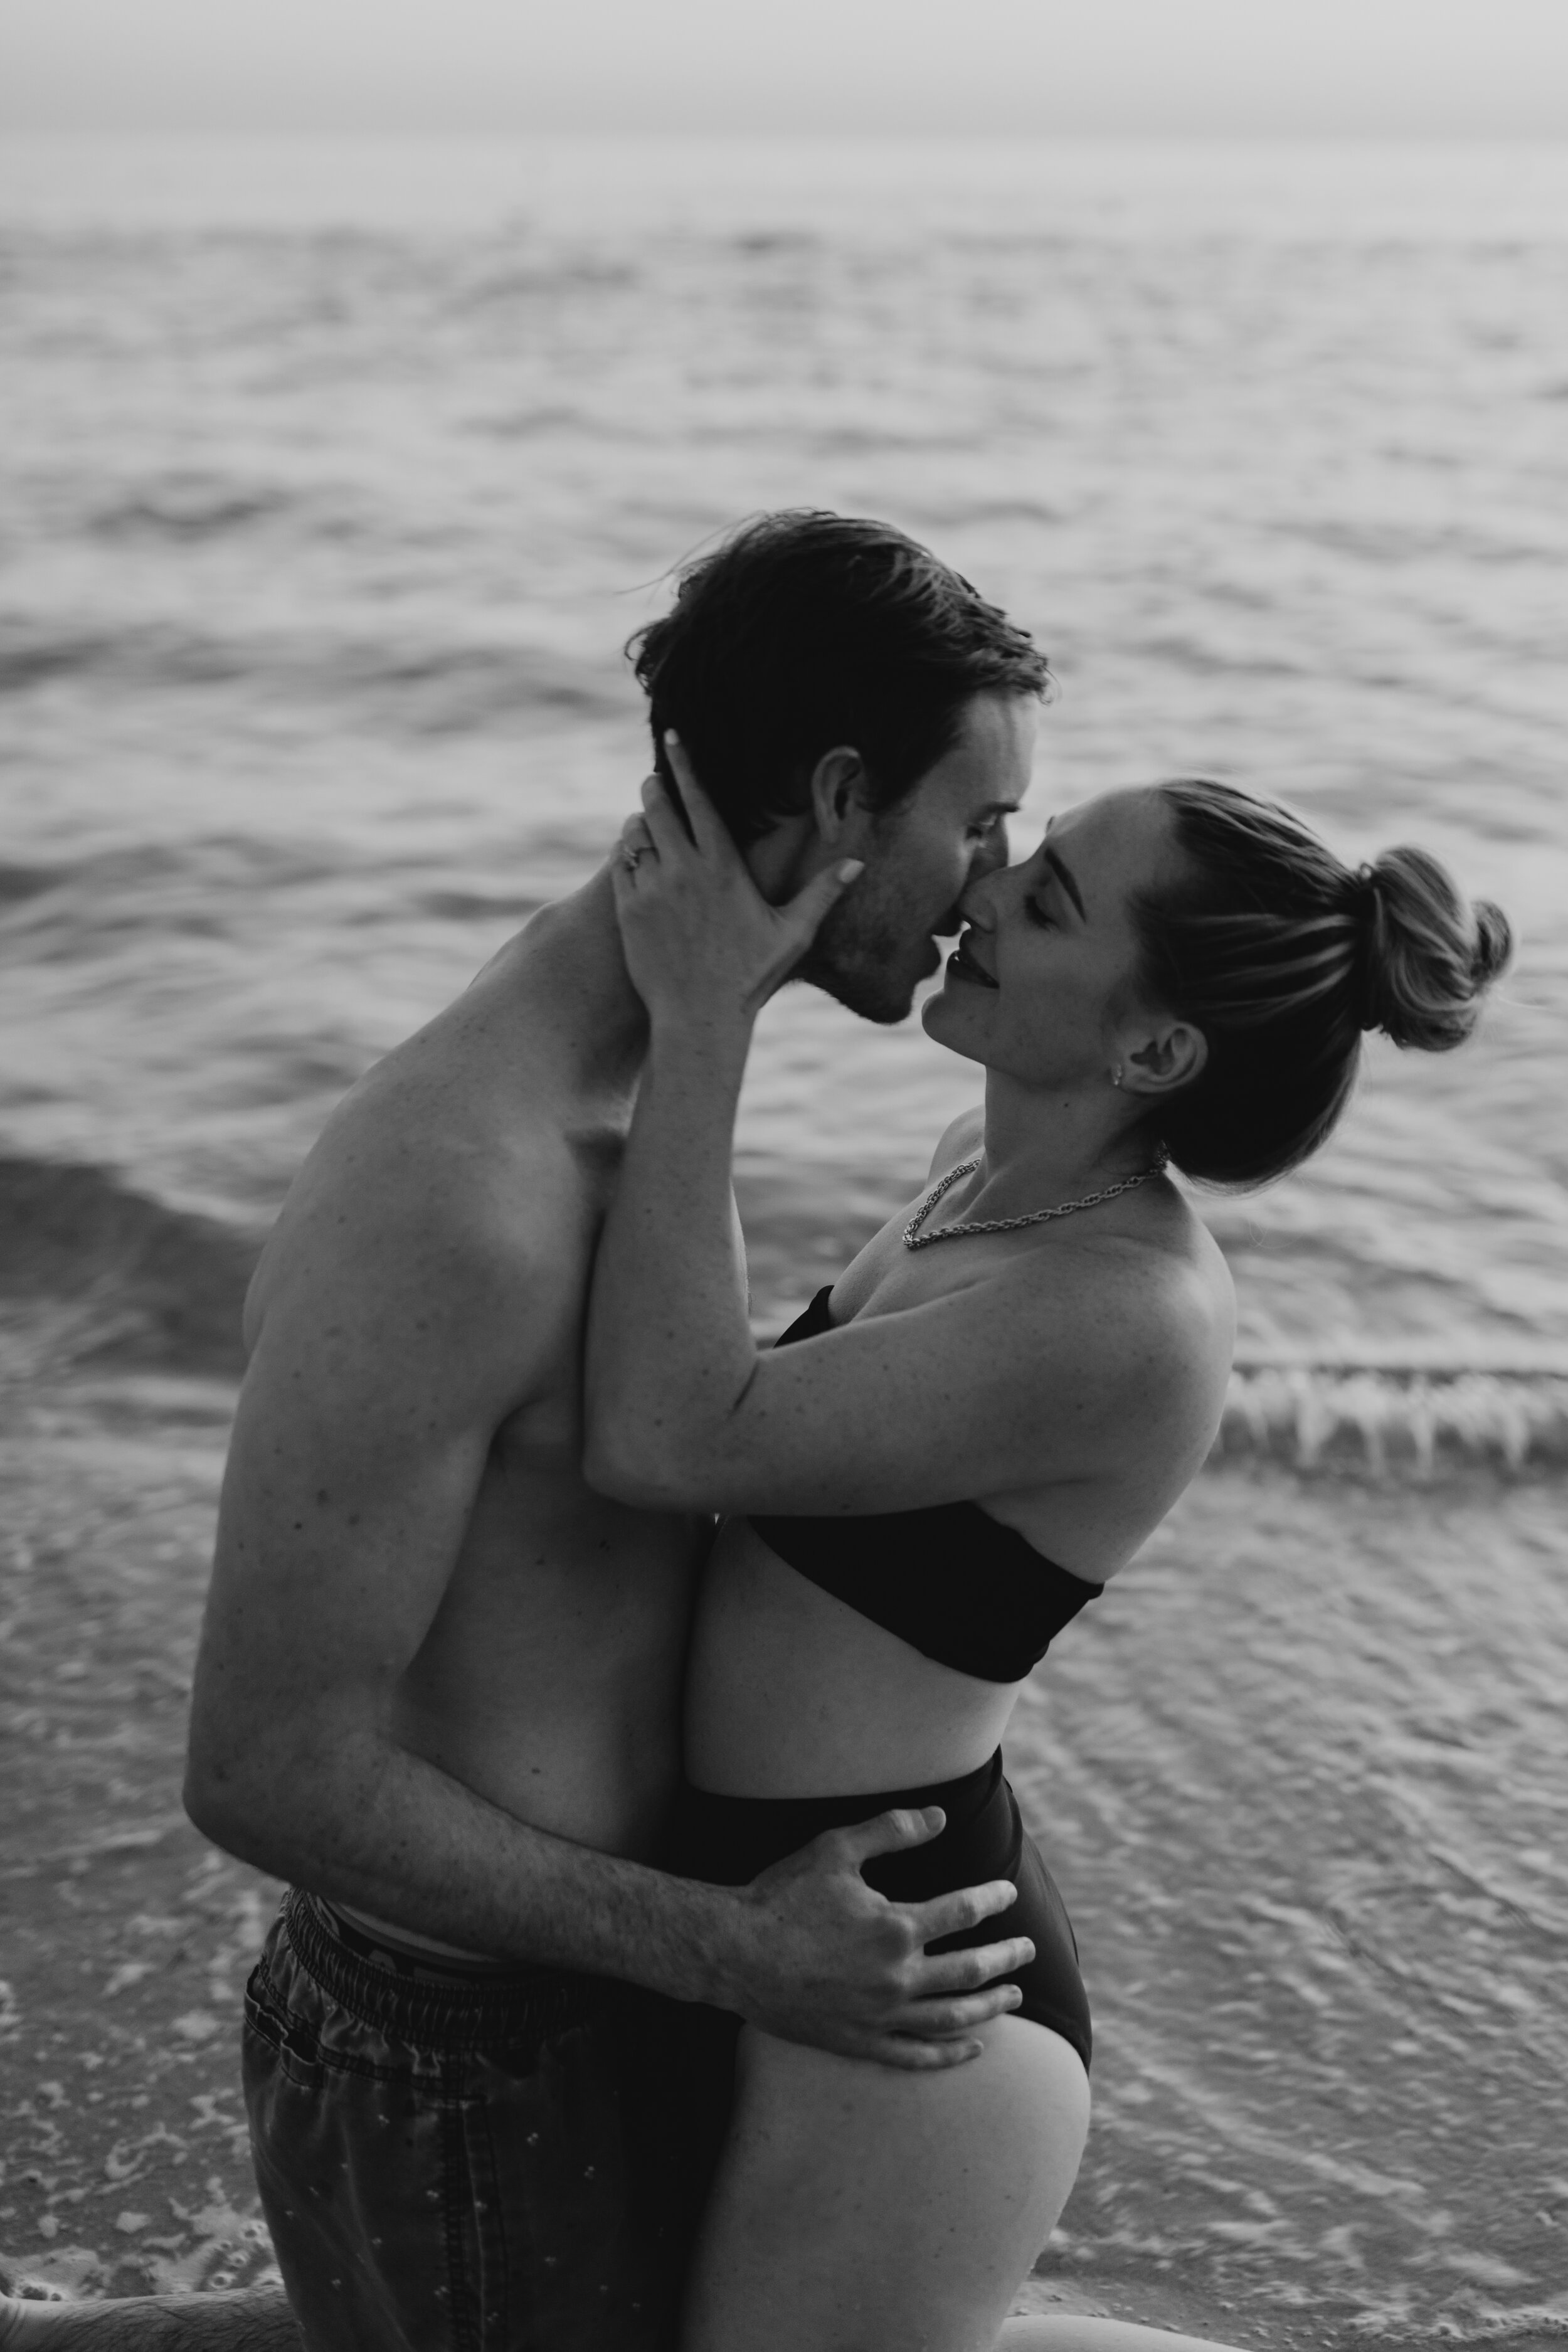 beach-couples-session-southern-california-couples-session-del-mar-photoshoot-beach-session-outfit-inspiration-outfit-casual-beach-outfit-comfy-beach-day-brayden-and-syd-photography-photos-with-dog